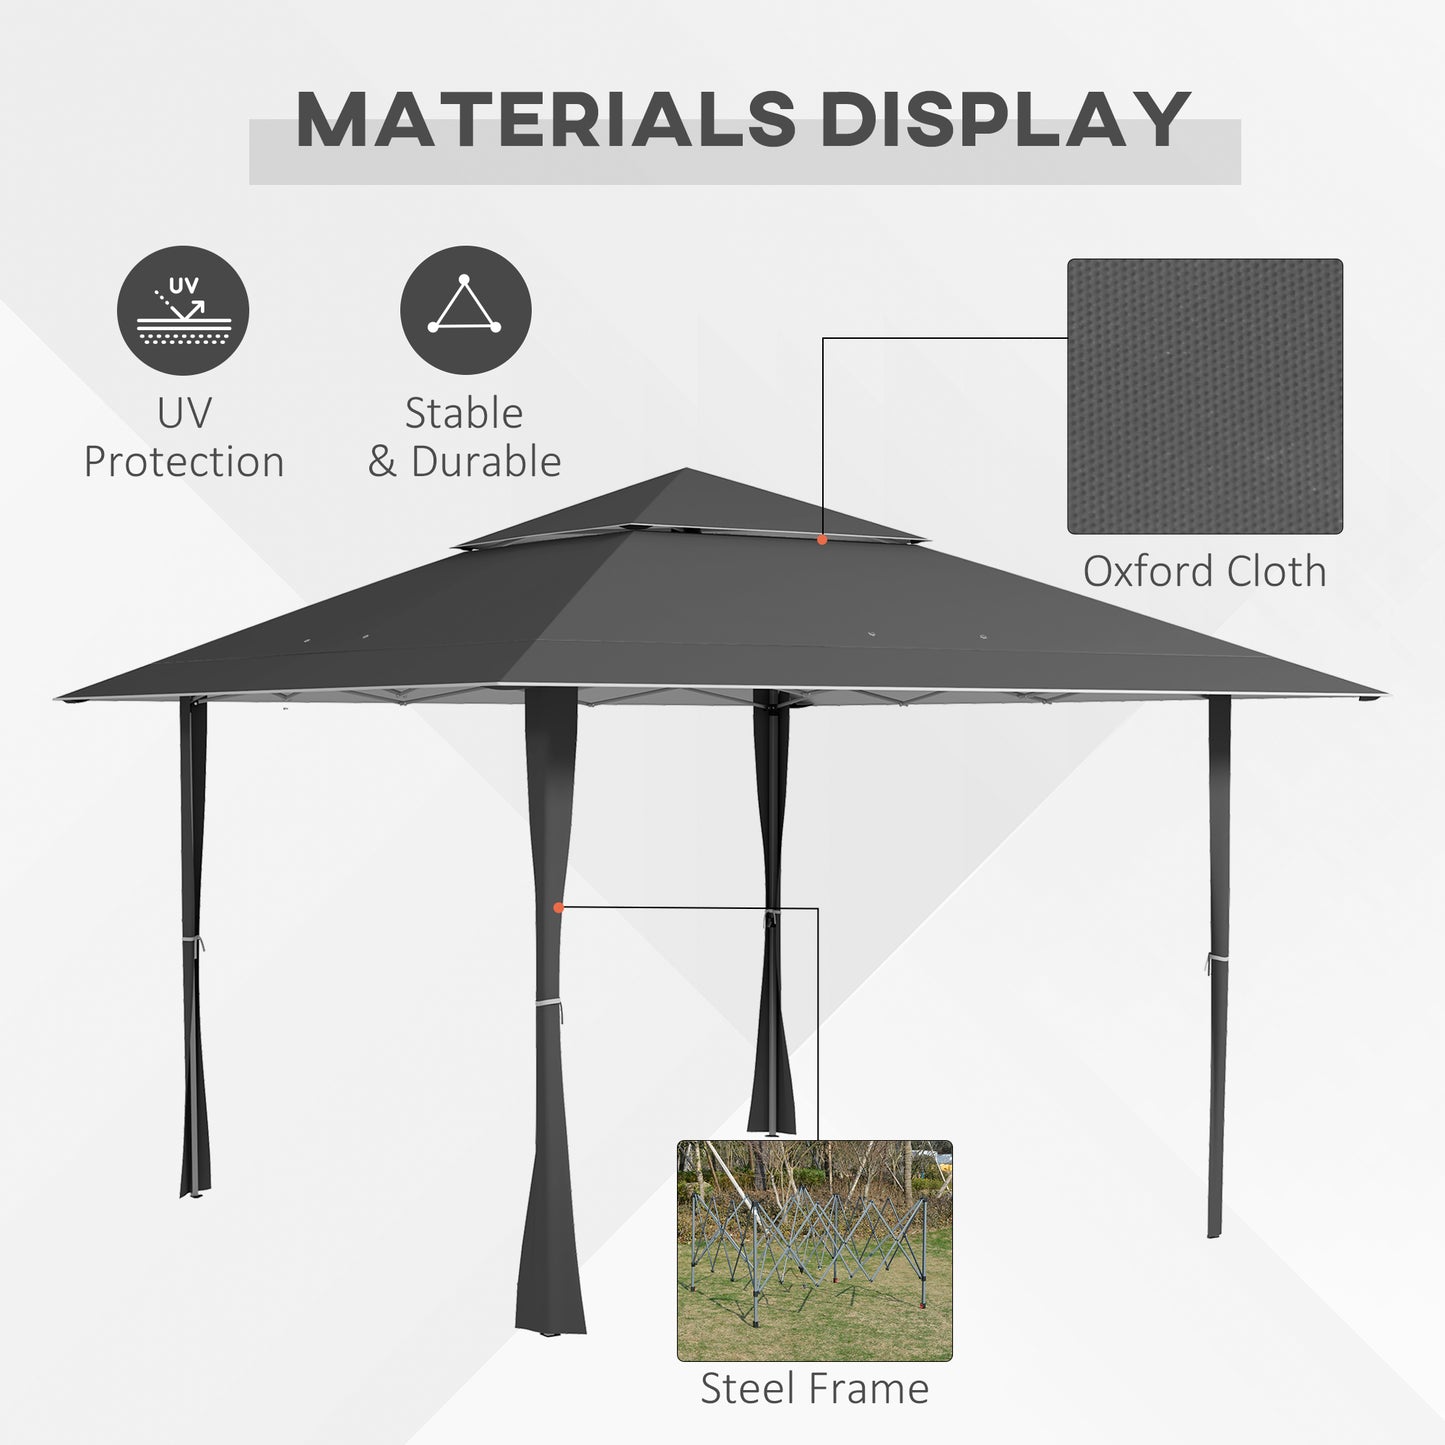 Outsunny Pop-up Gazebo with Double Roof, 4 x 4m, Canopy Tent, UV Proof, Roller Bag, Adjustable Legs, Outdoor Party, Steel Frame, Dark Grey